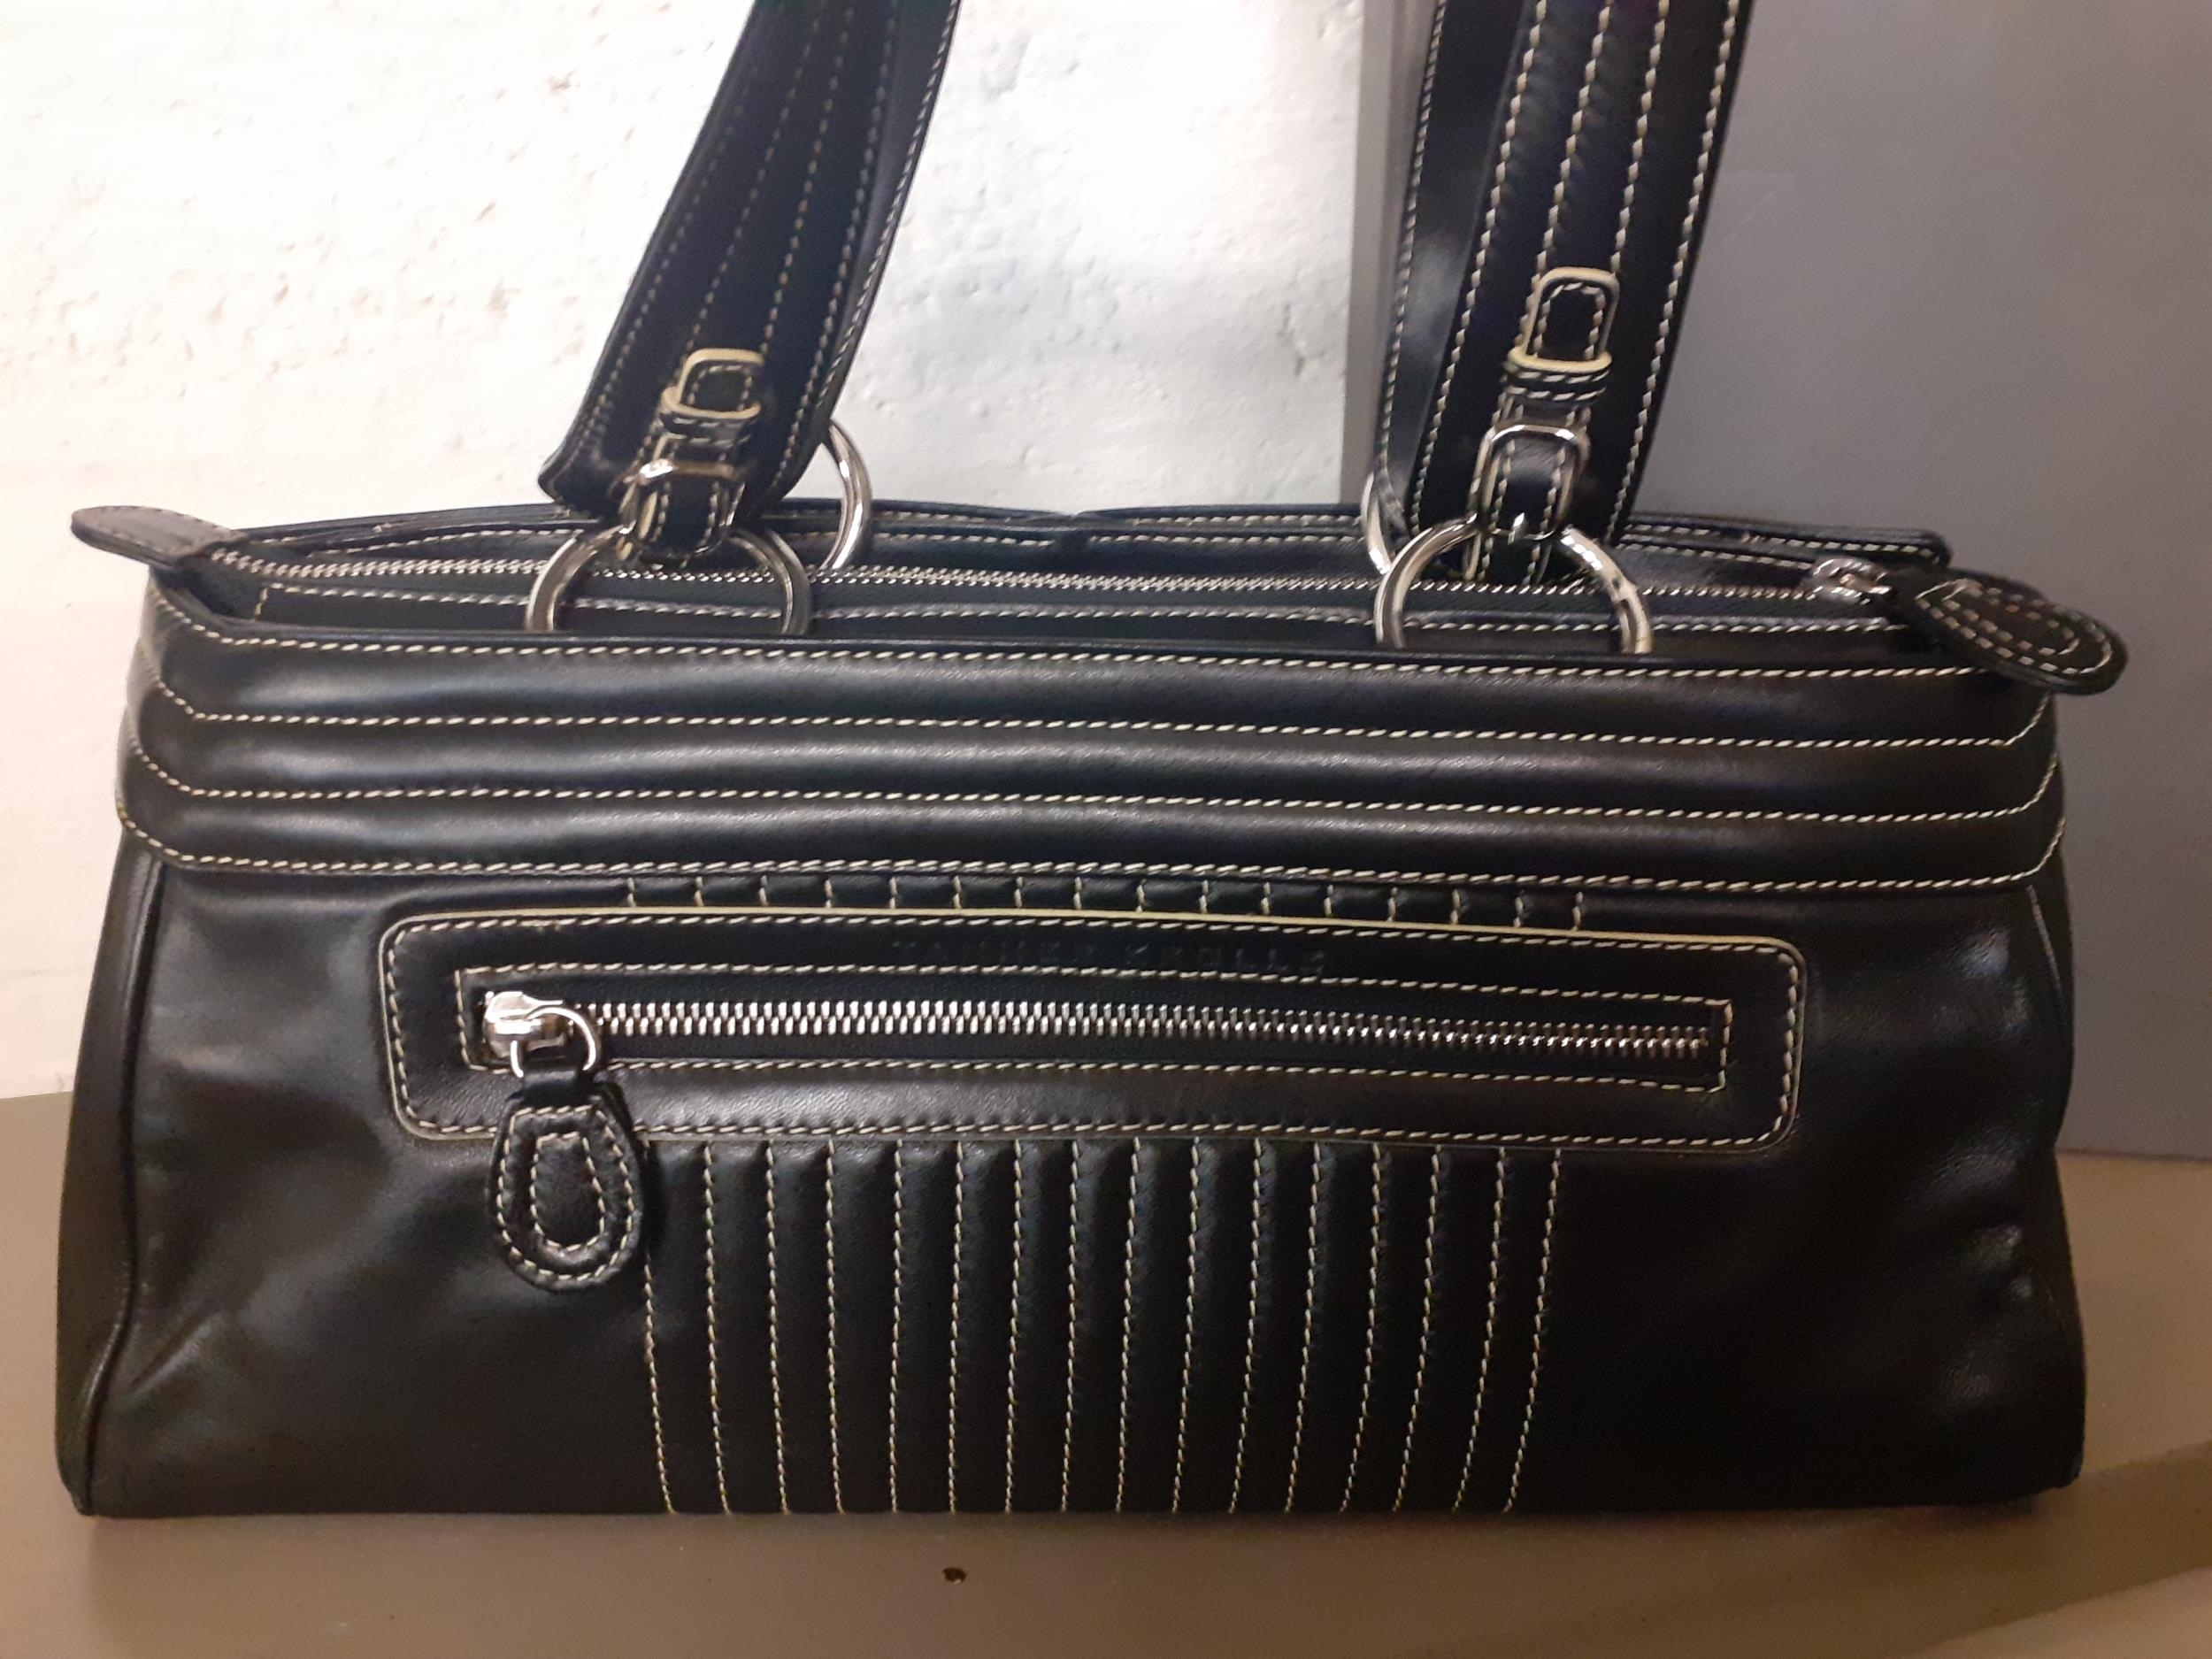 A Tanner Krolle black leather handbag with white stitching in a geometric fashion having silver tone - Image 4 of 4